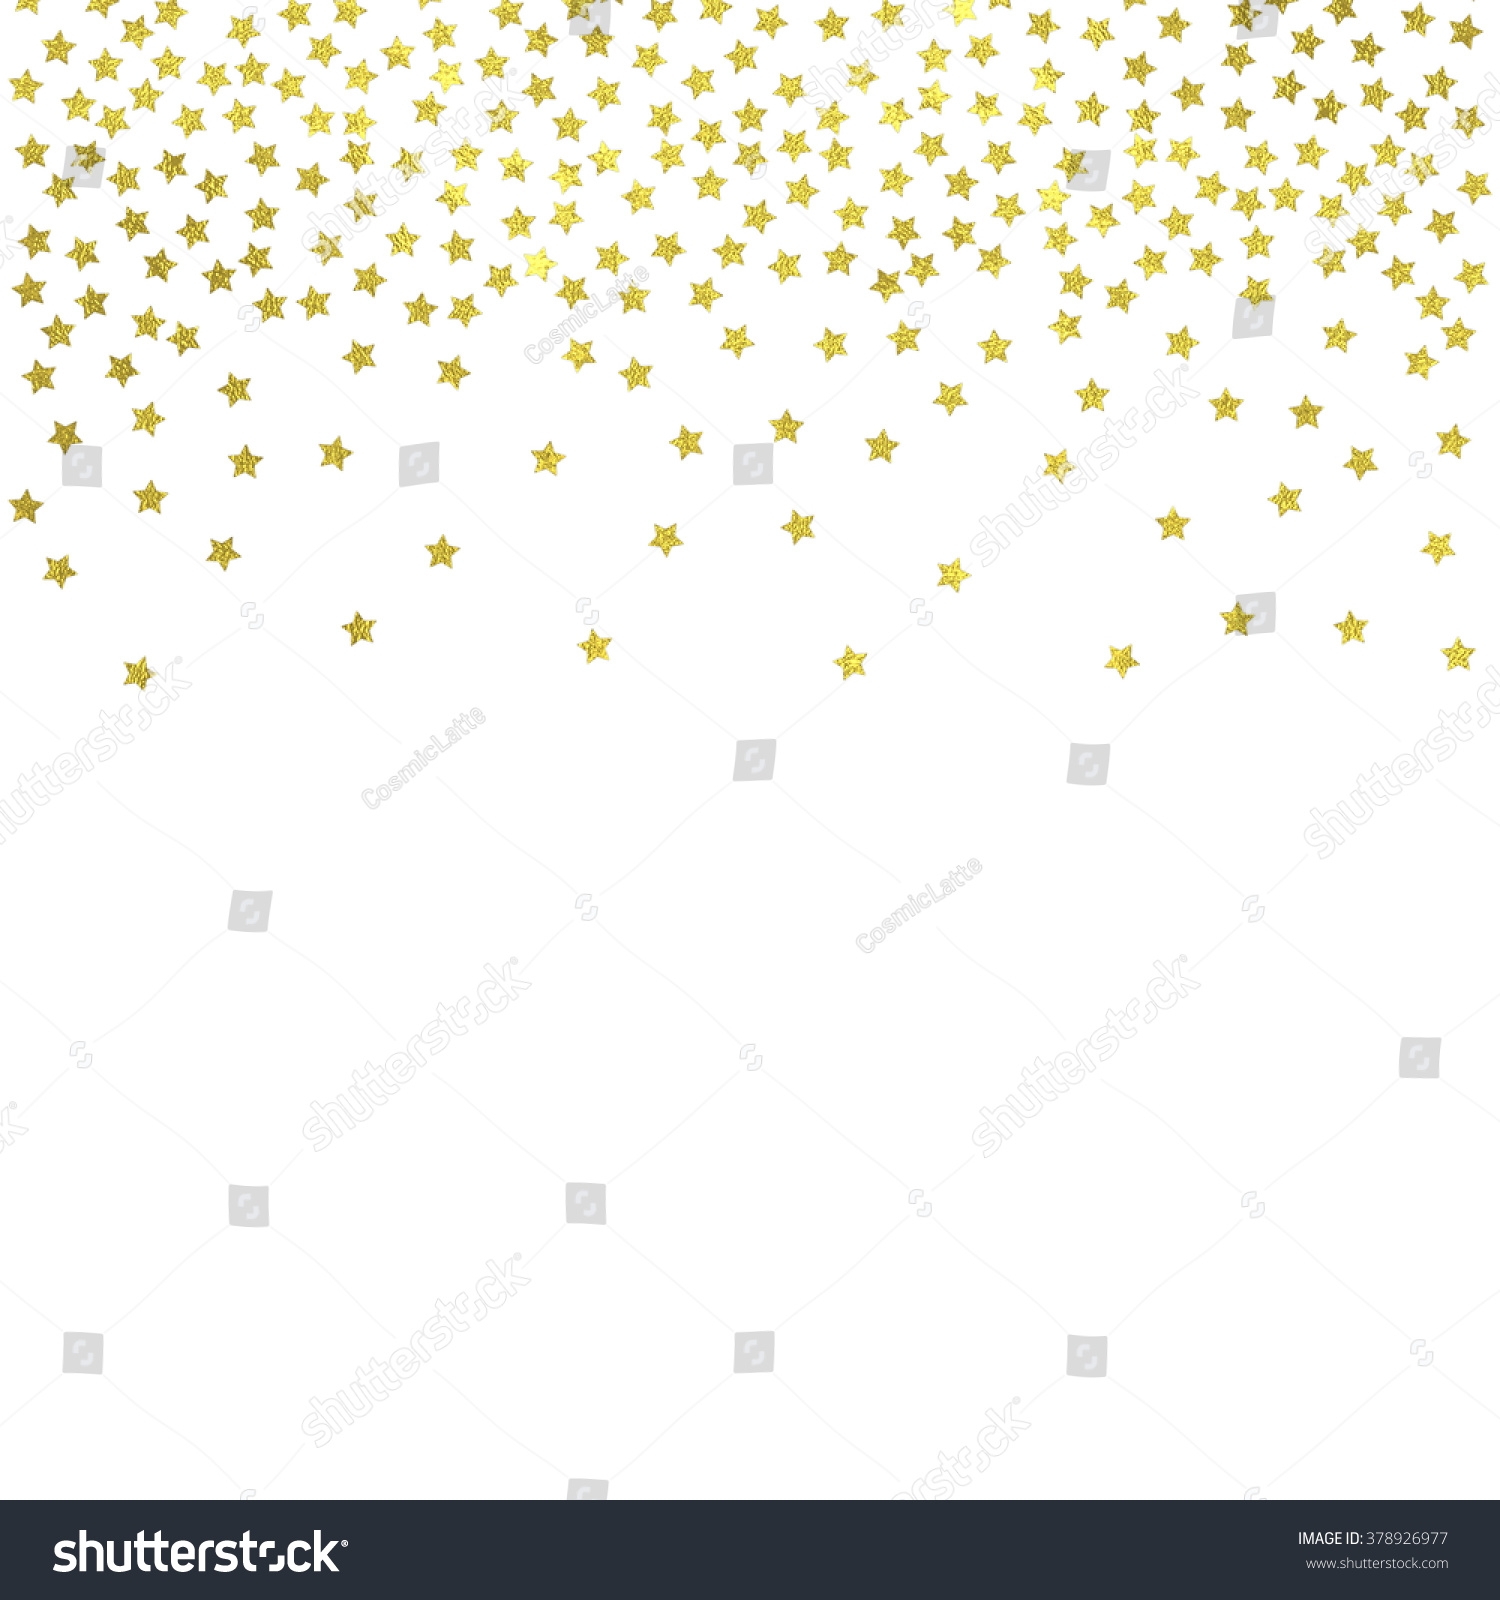 stock photo sparkle texture background stars gold confetti illustration template for book cover brochure 378926977